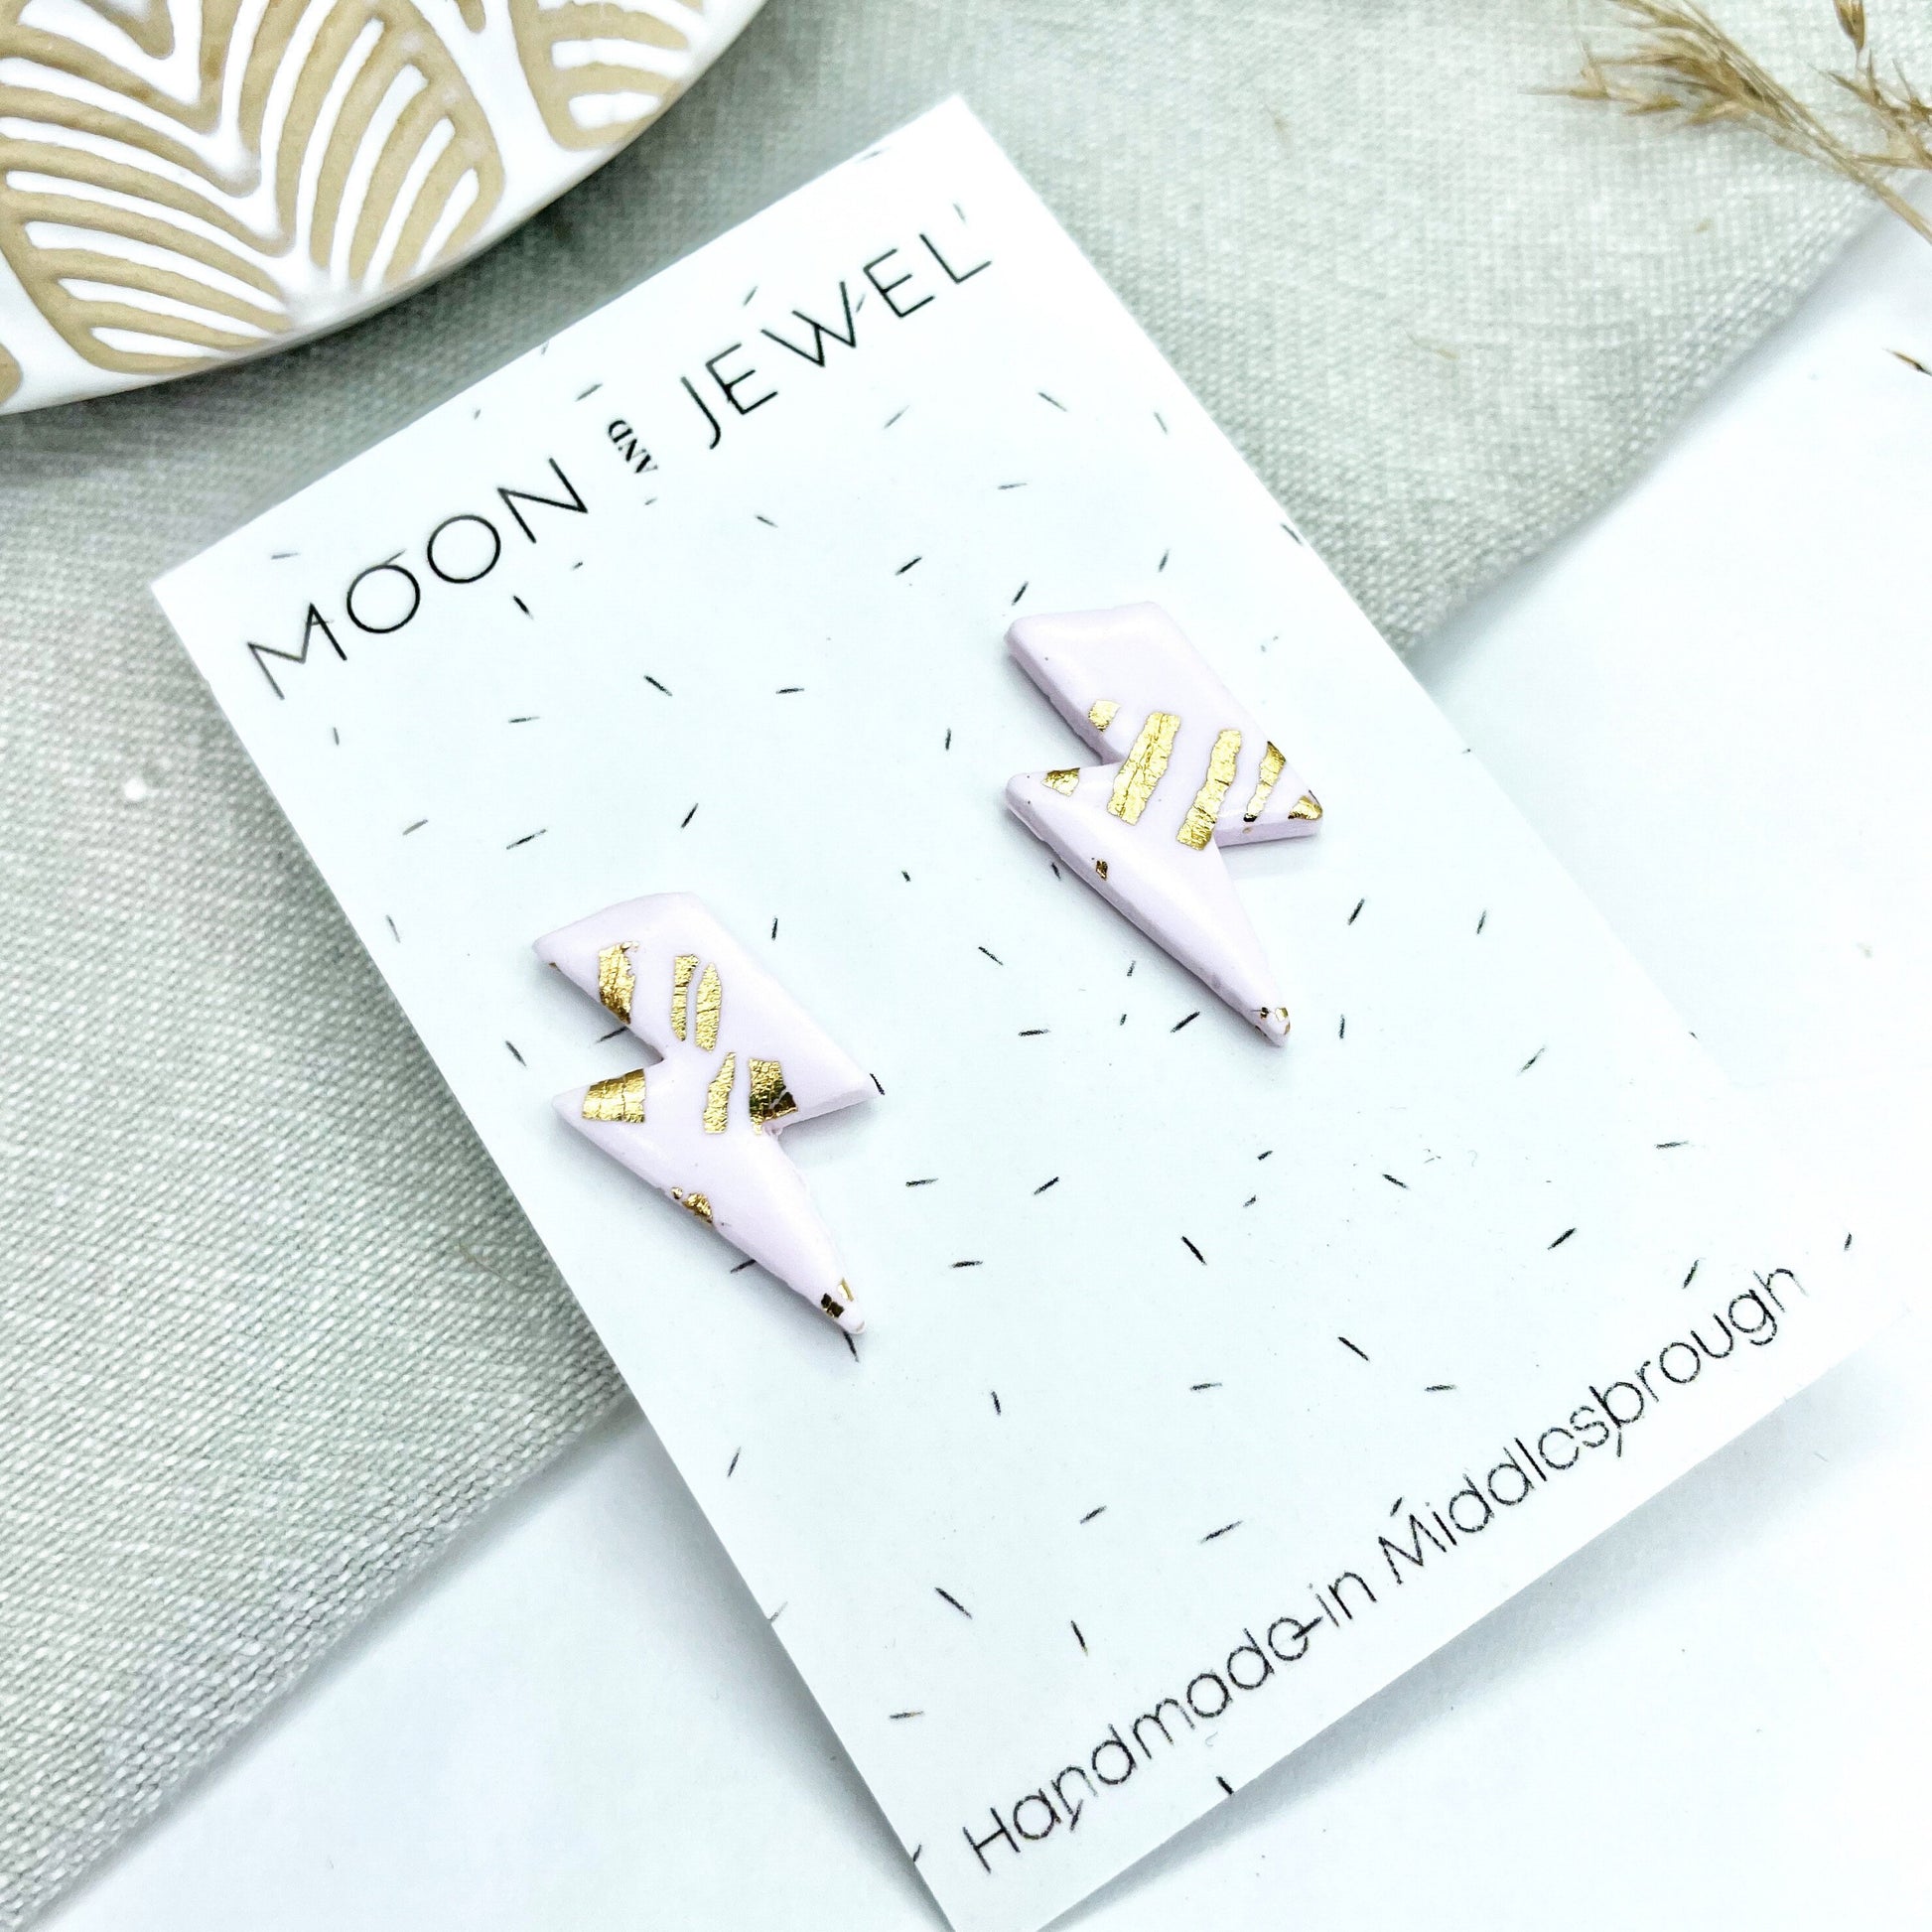 Lightning bolt earrings, pink & gold leaf polymer clay stud earrings, beautiful Christmas gift for her, girlfriend gift, post box gift